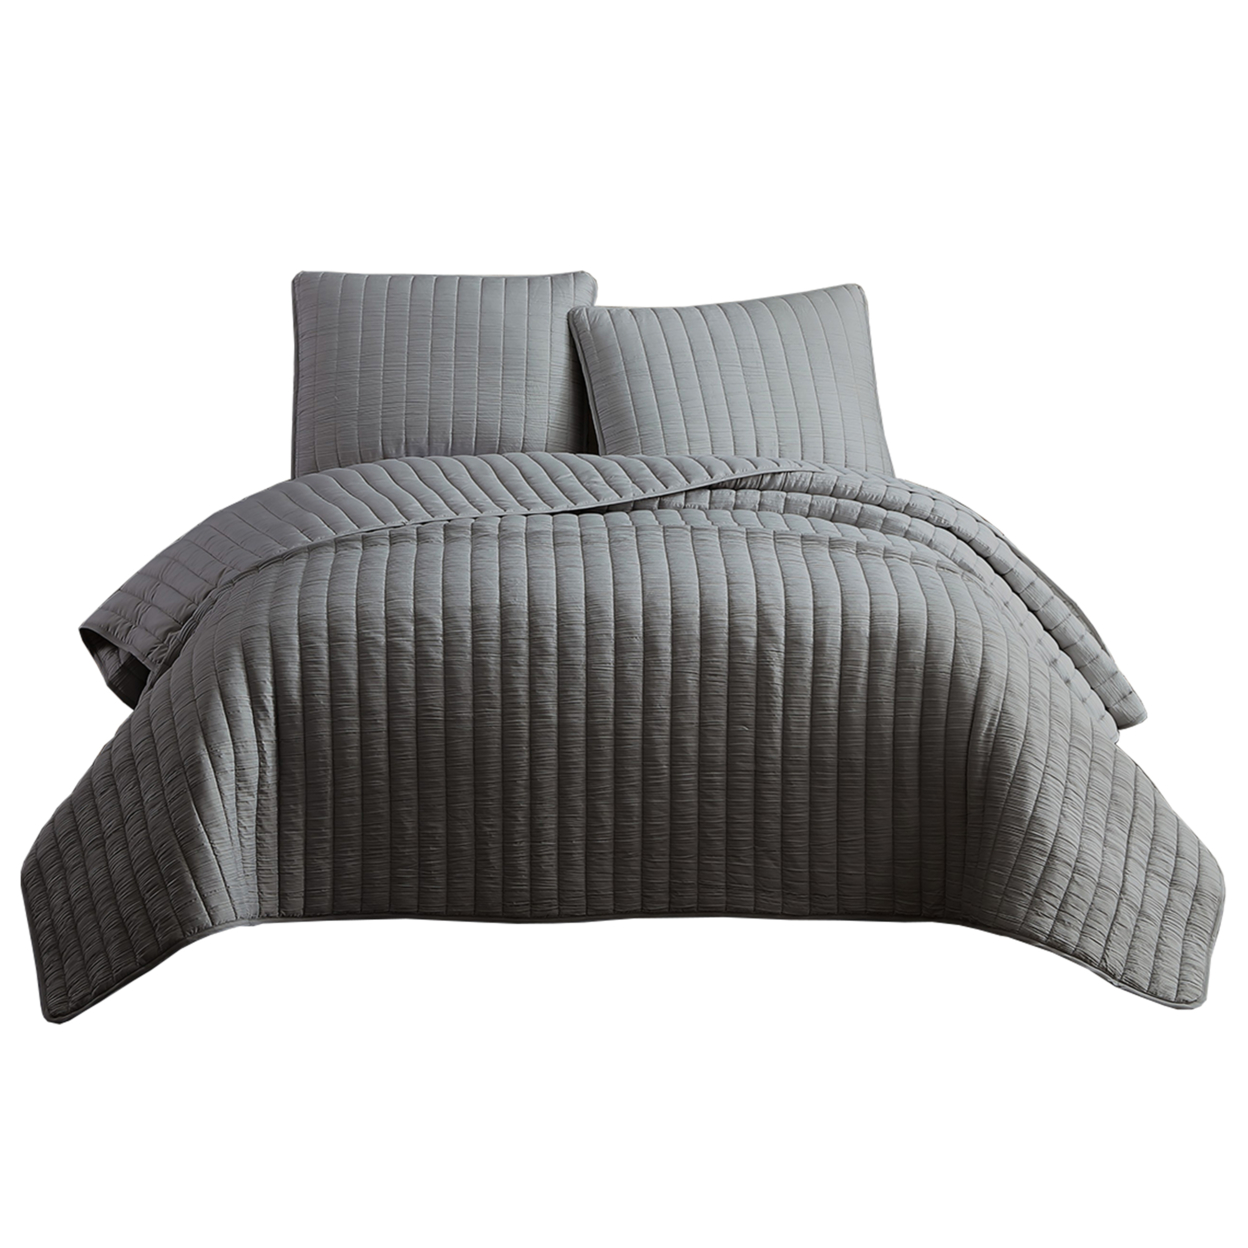 3 Piece Crinkles King Size Coverlet Set With Vertical Stitching, Gray- Saltoro Sherpi